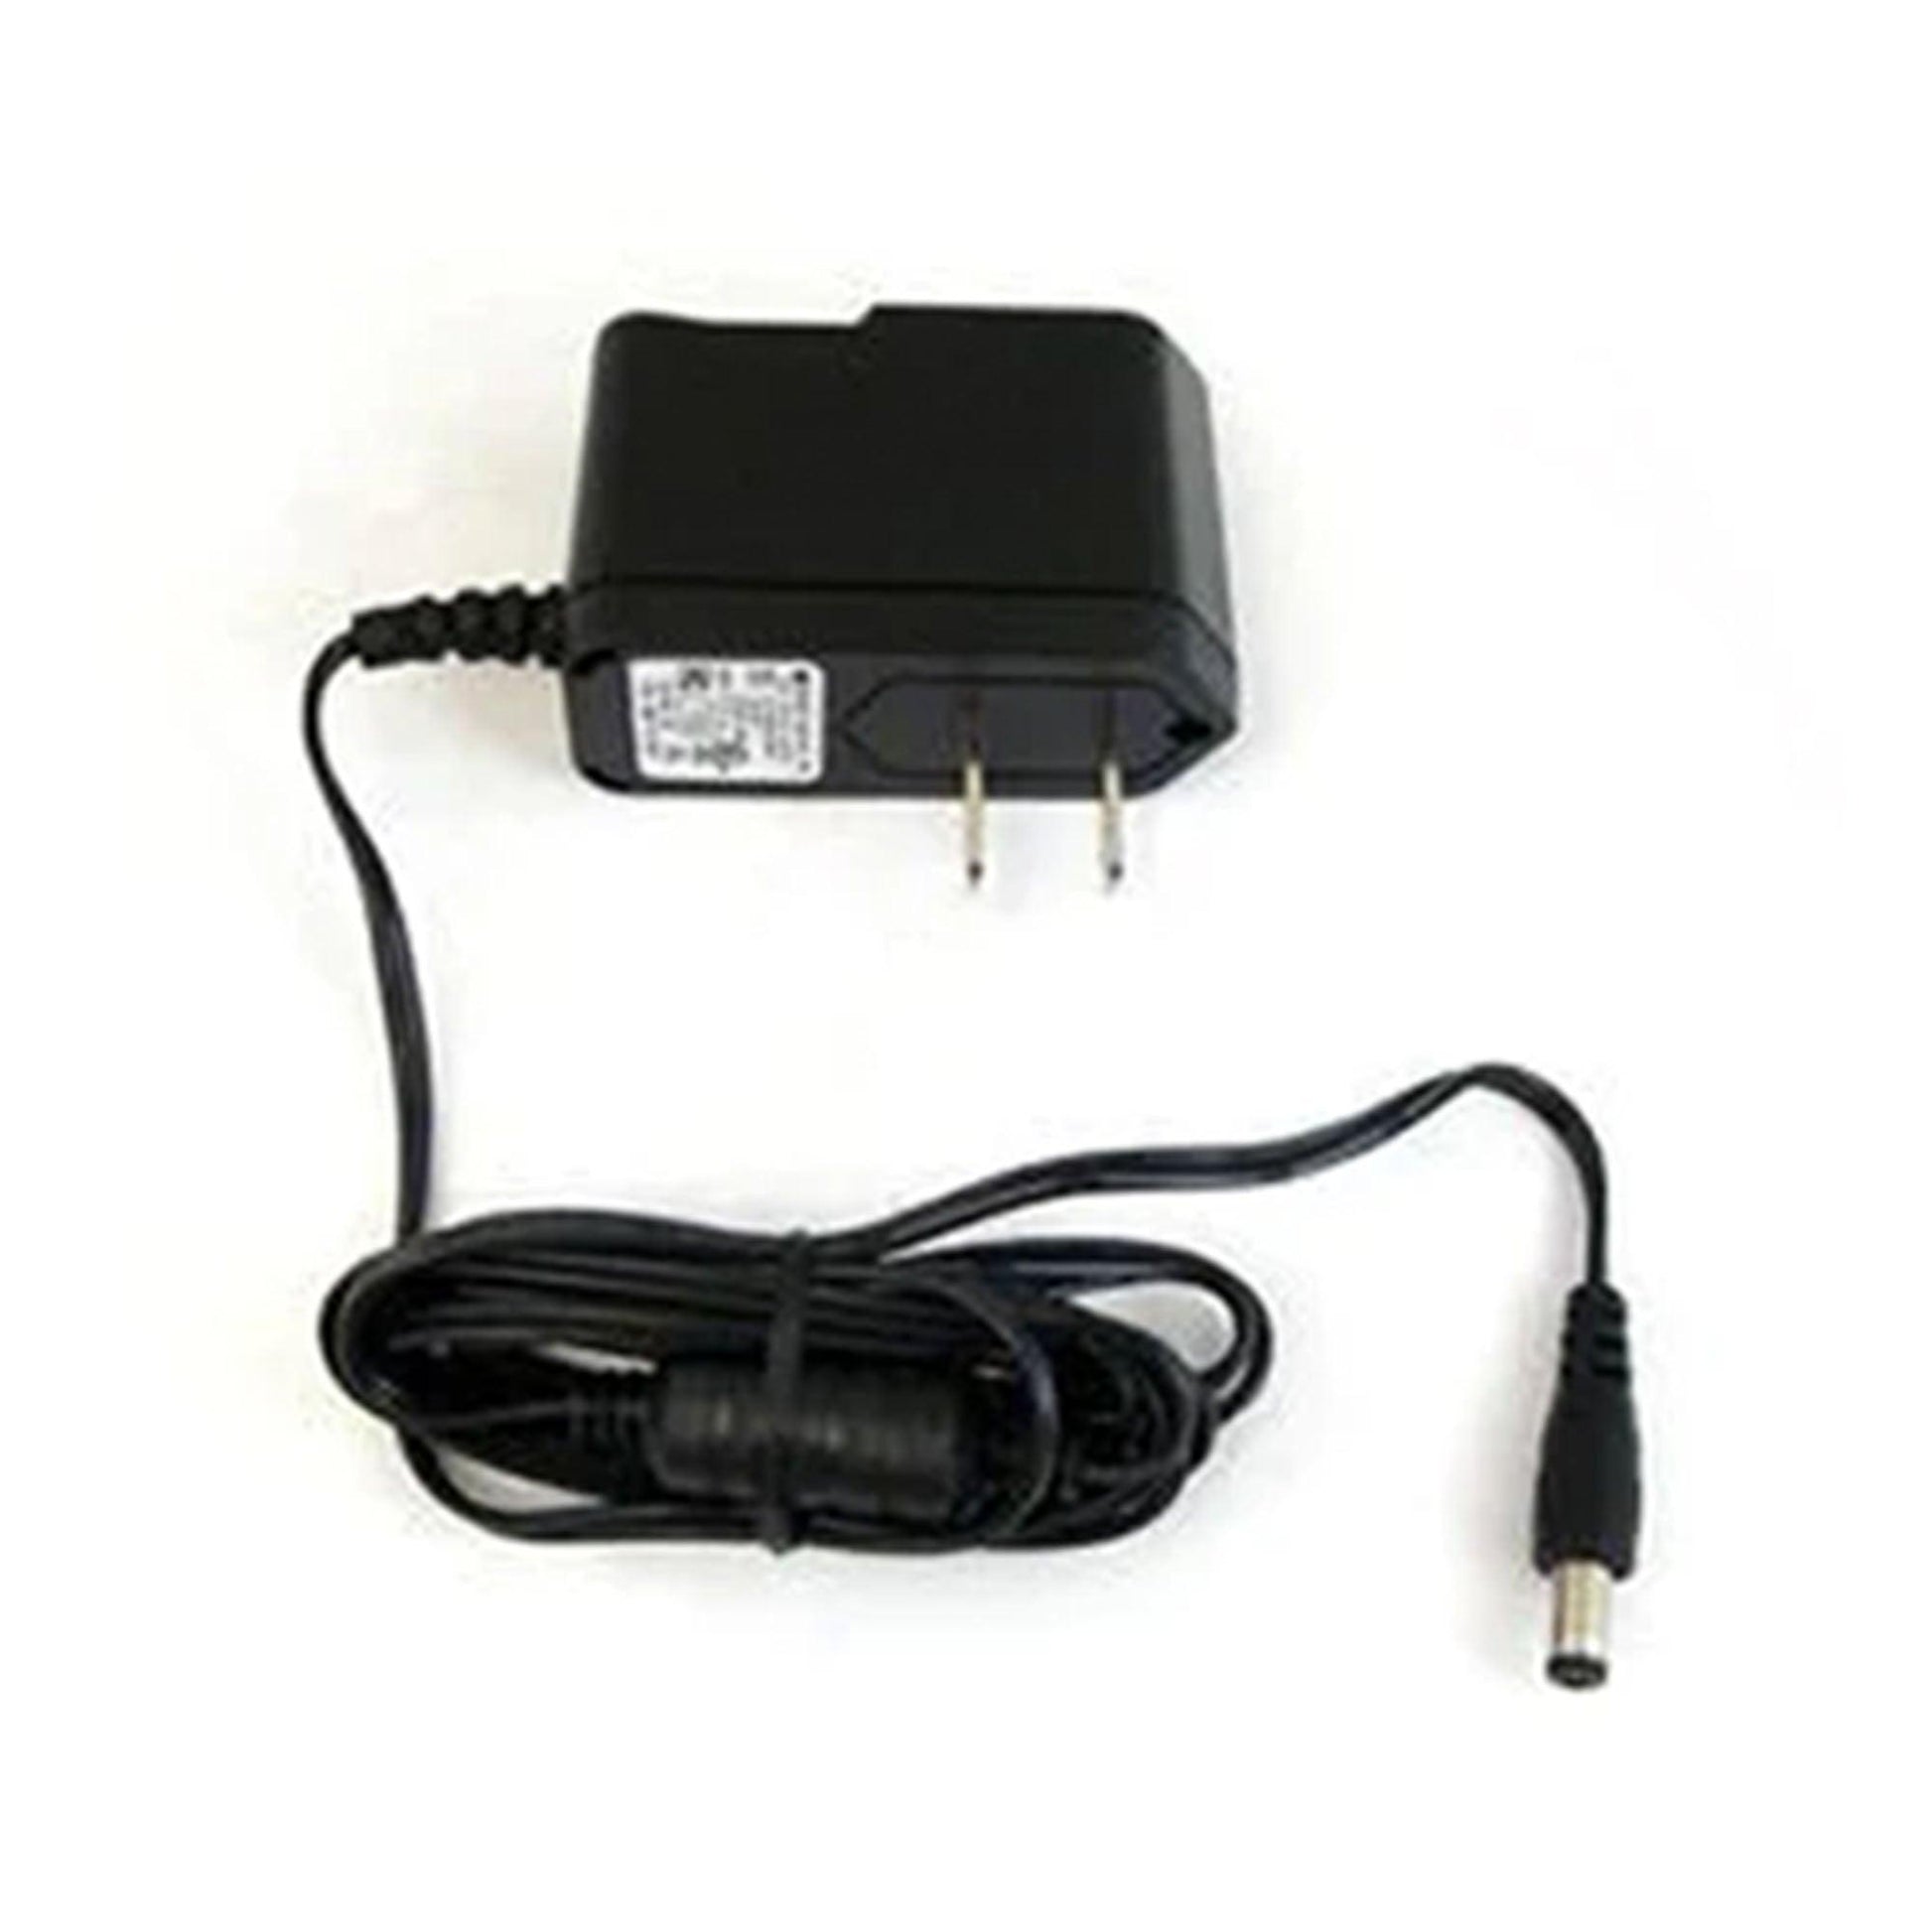 Yealink Power Adapter - For models T32, T38, T46, T48, T54 - SpectrumVoIP